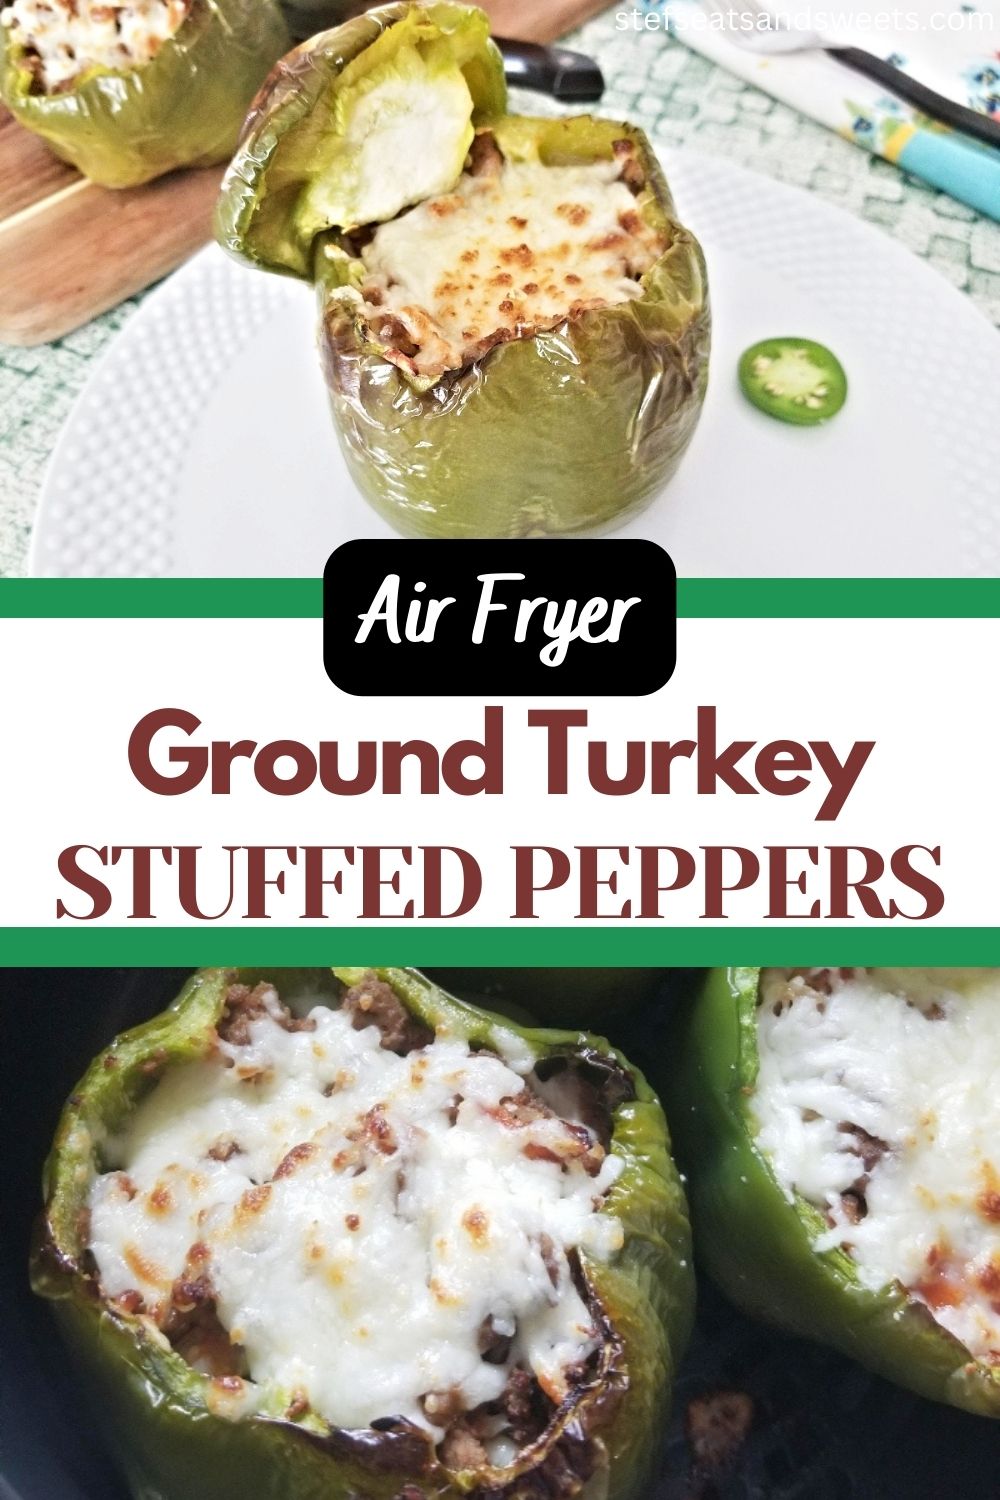 Air Fryer Ground Turkey Stuffed Peppers with Fresh Ingredients 